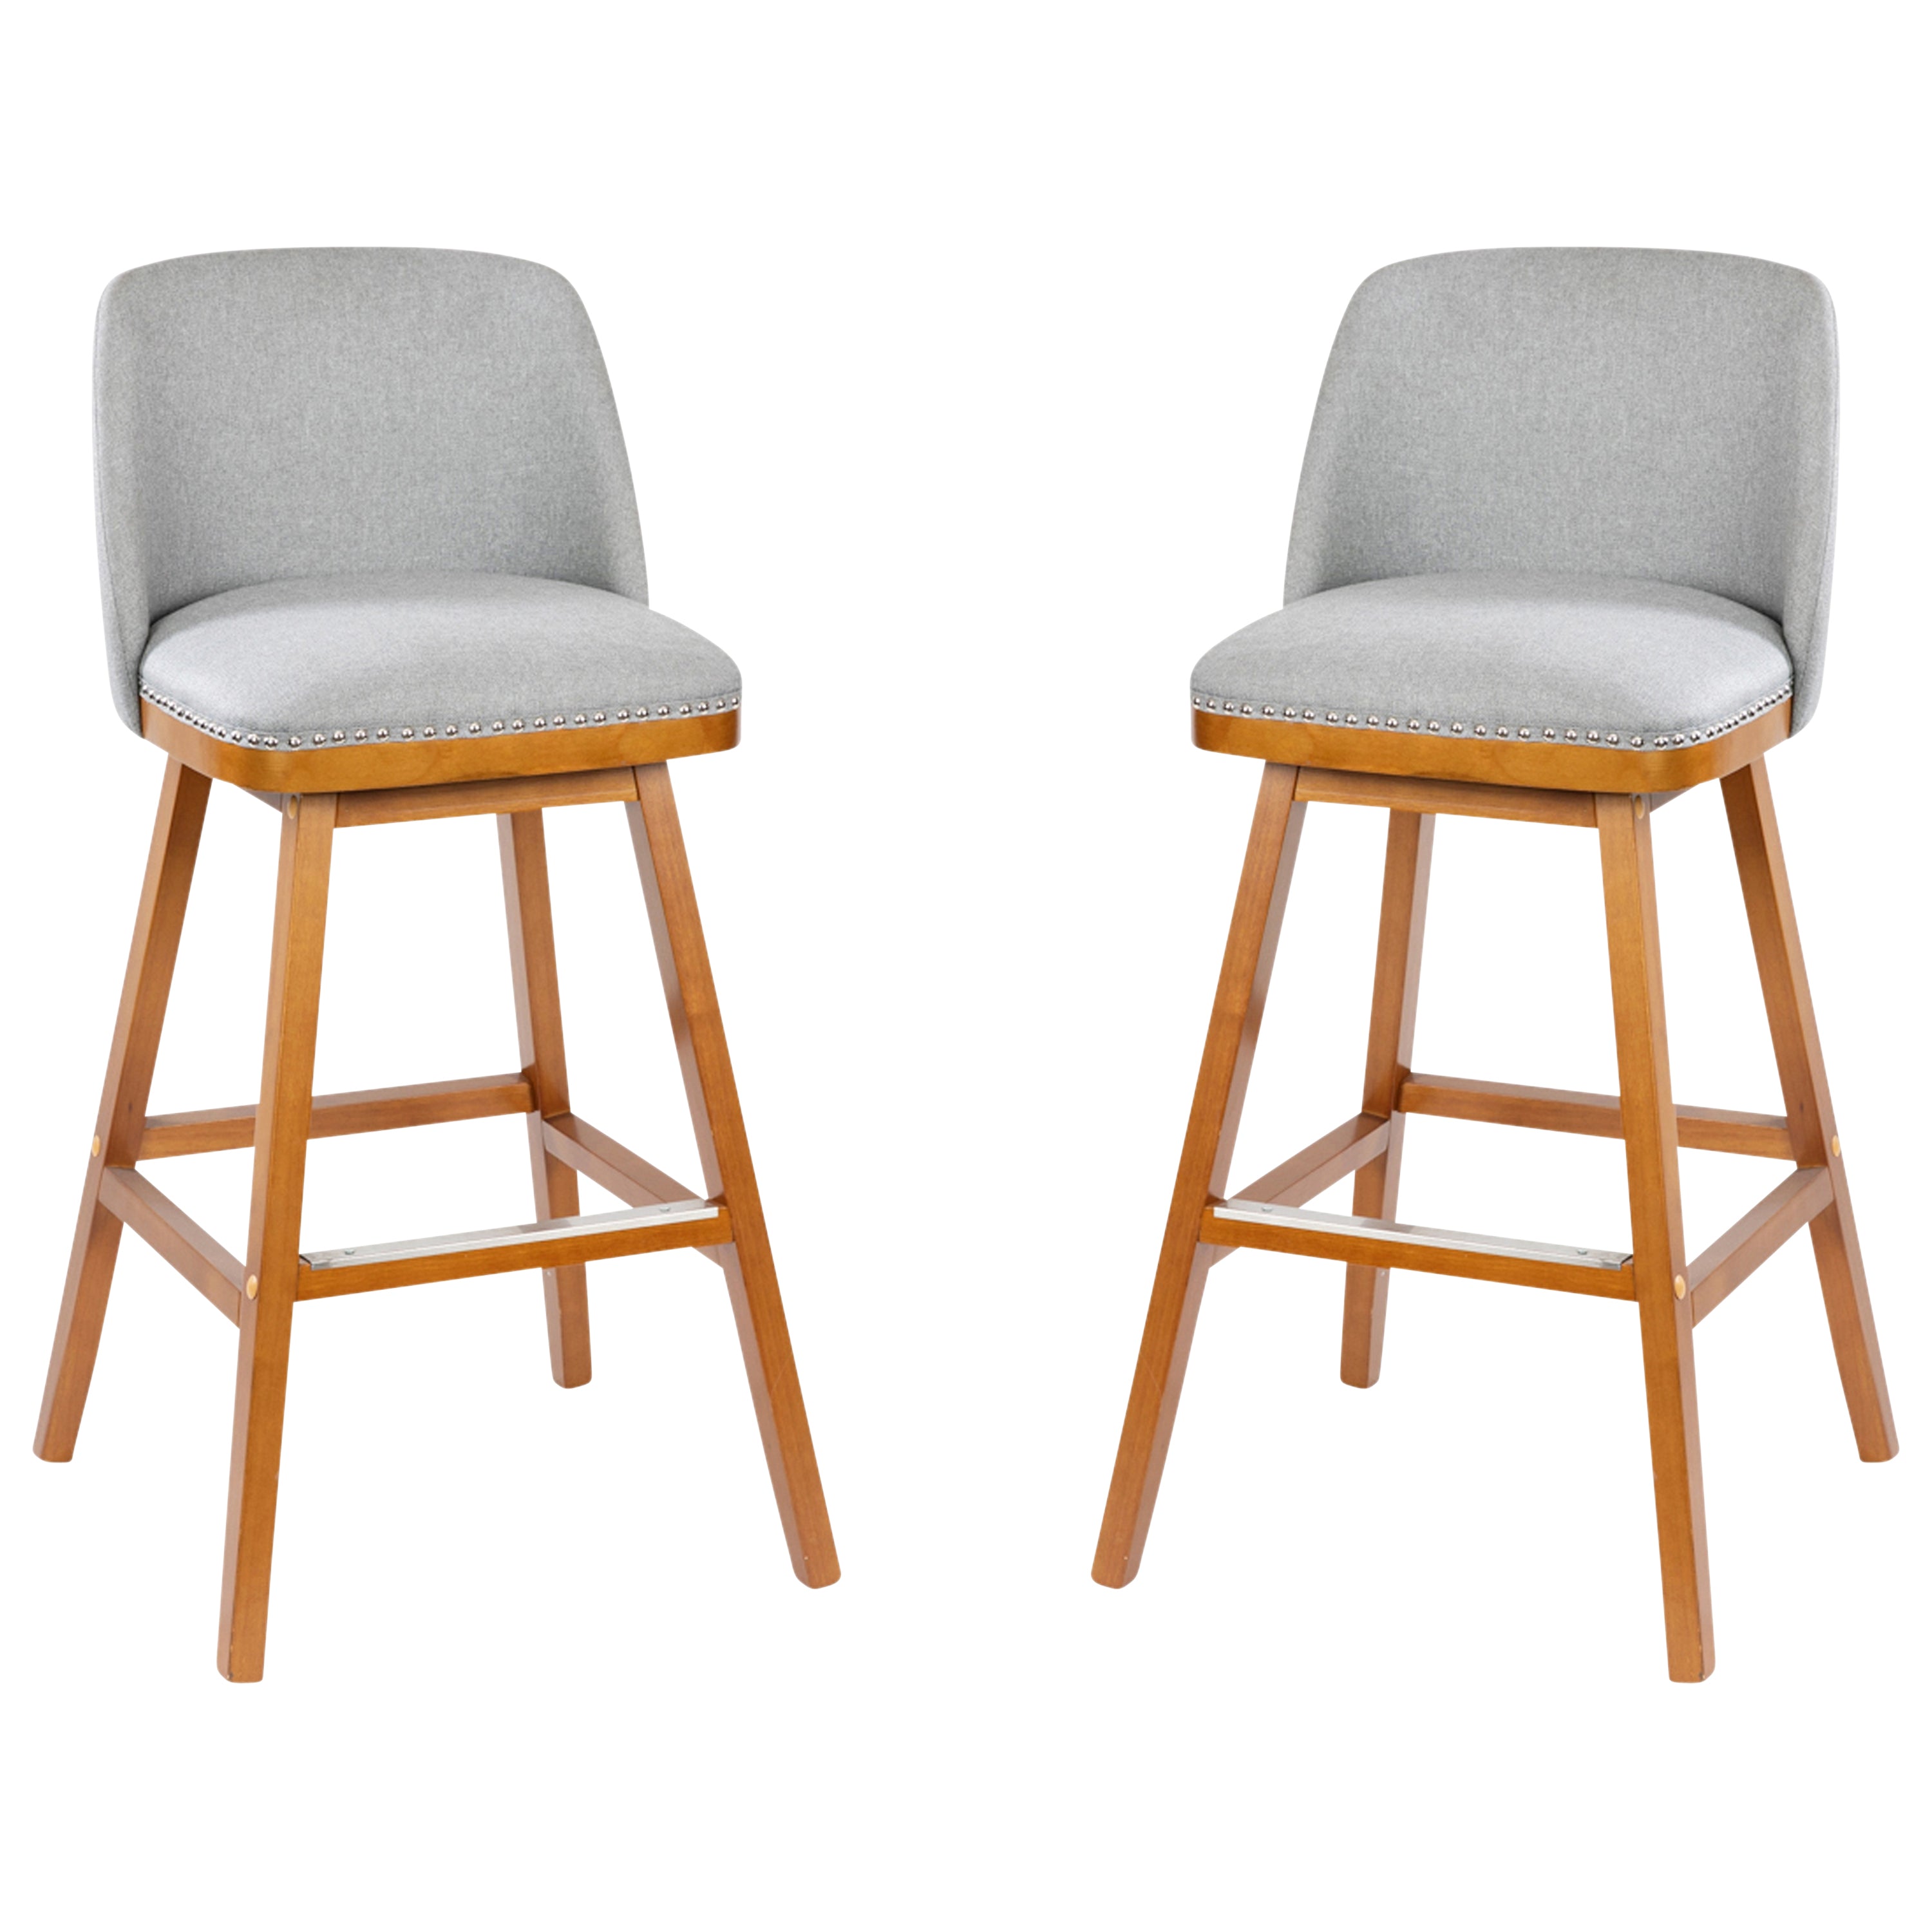 Julia Set of 2 Transitional Upholstered Barstools with Nailhead Trim and Solid Wood Frames-Barstool-Flash Furniture-Wall2Wall Furnishings